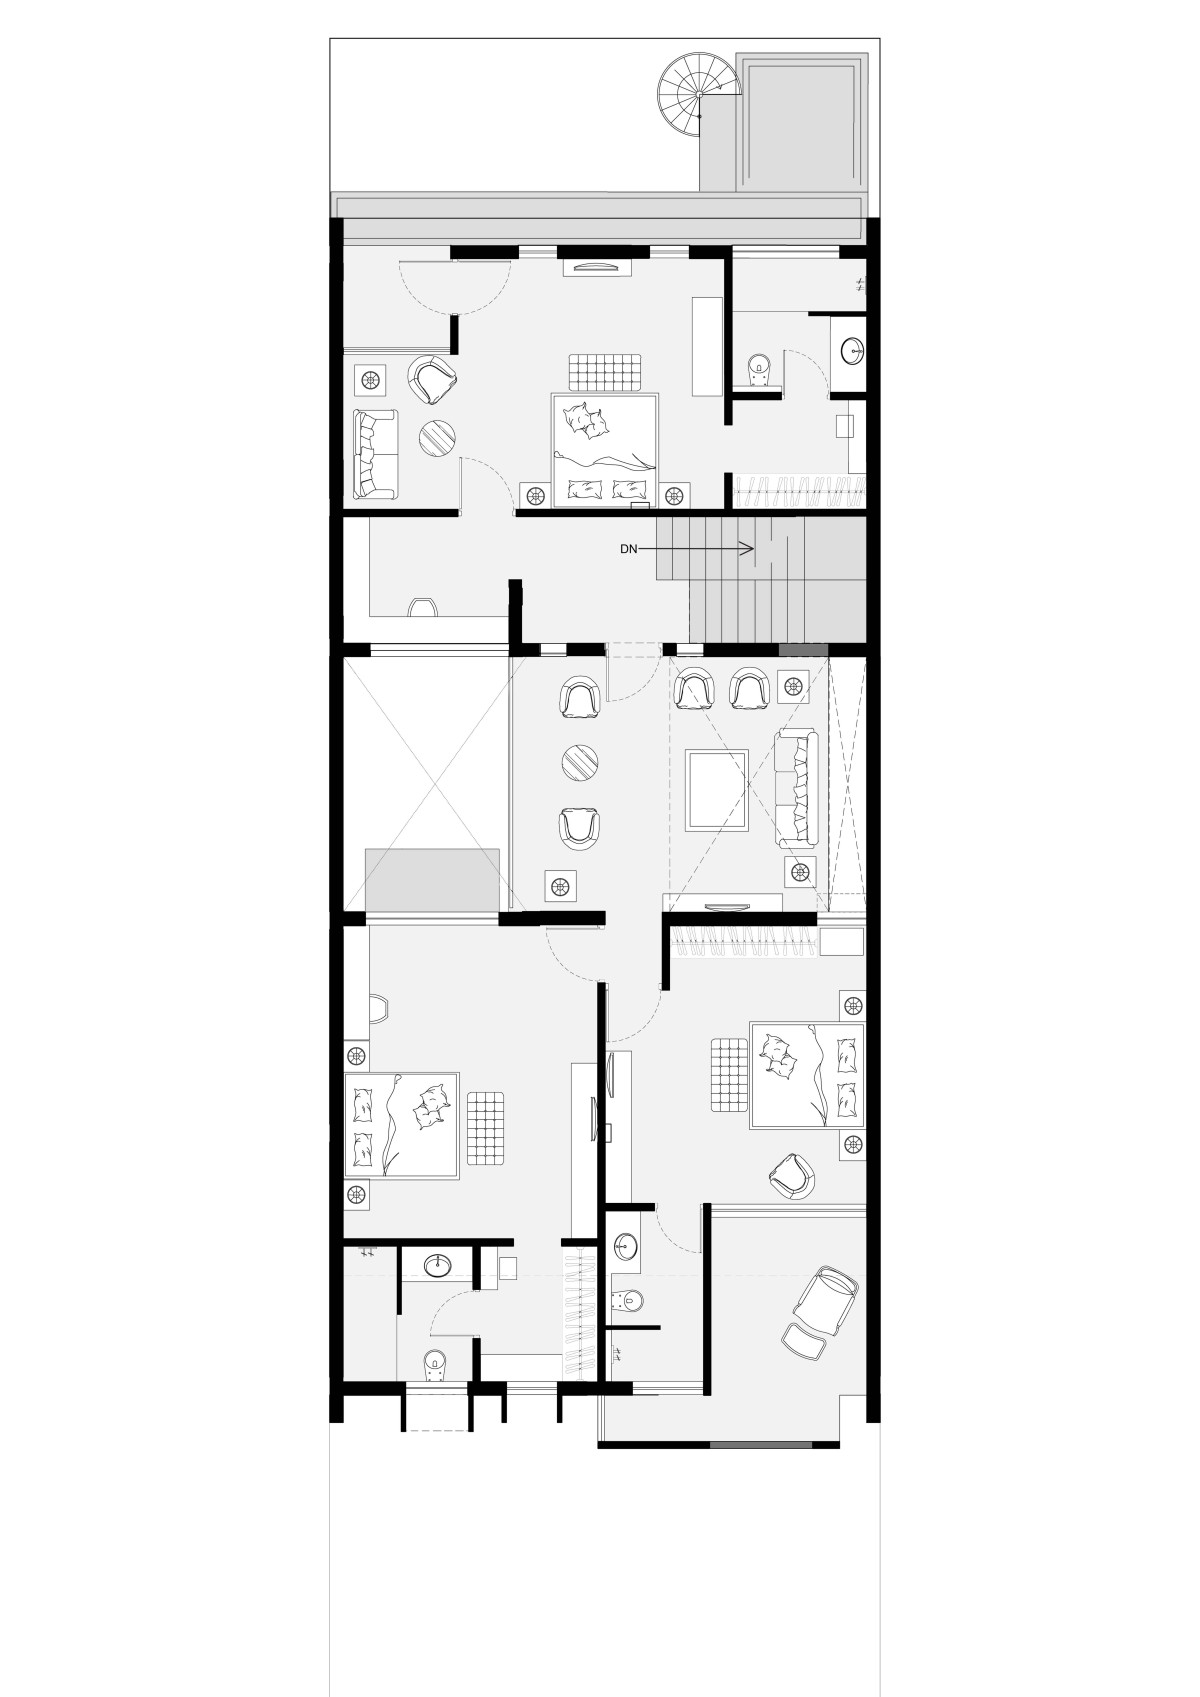 First Floor Plan of The Cucoon House by Forum Advaita